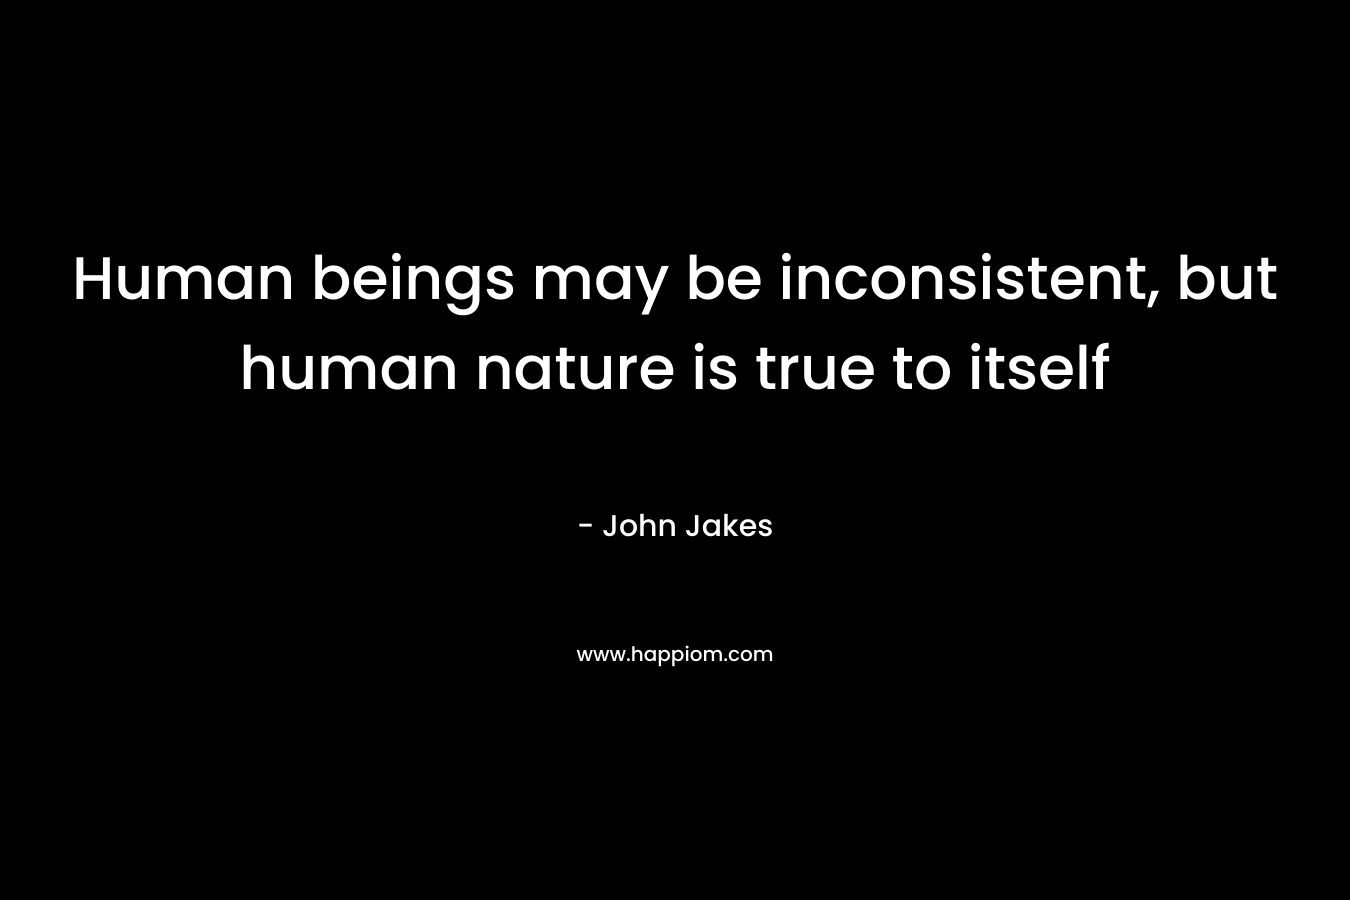 Human beings may be inconsistent, but human nature is true to itself – John Jakes